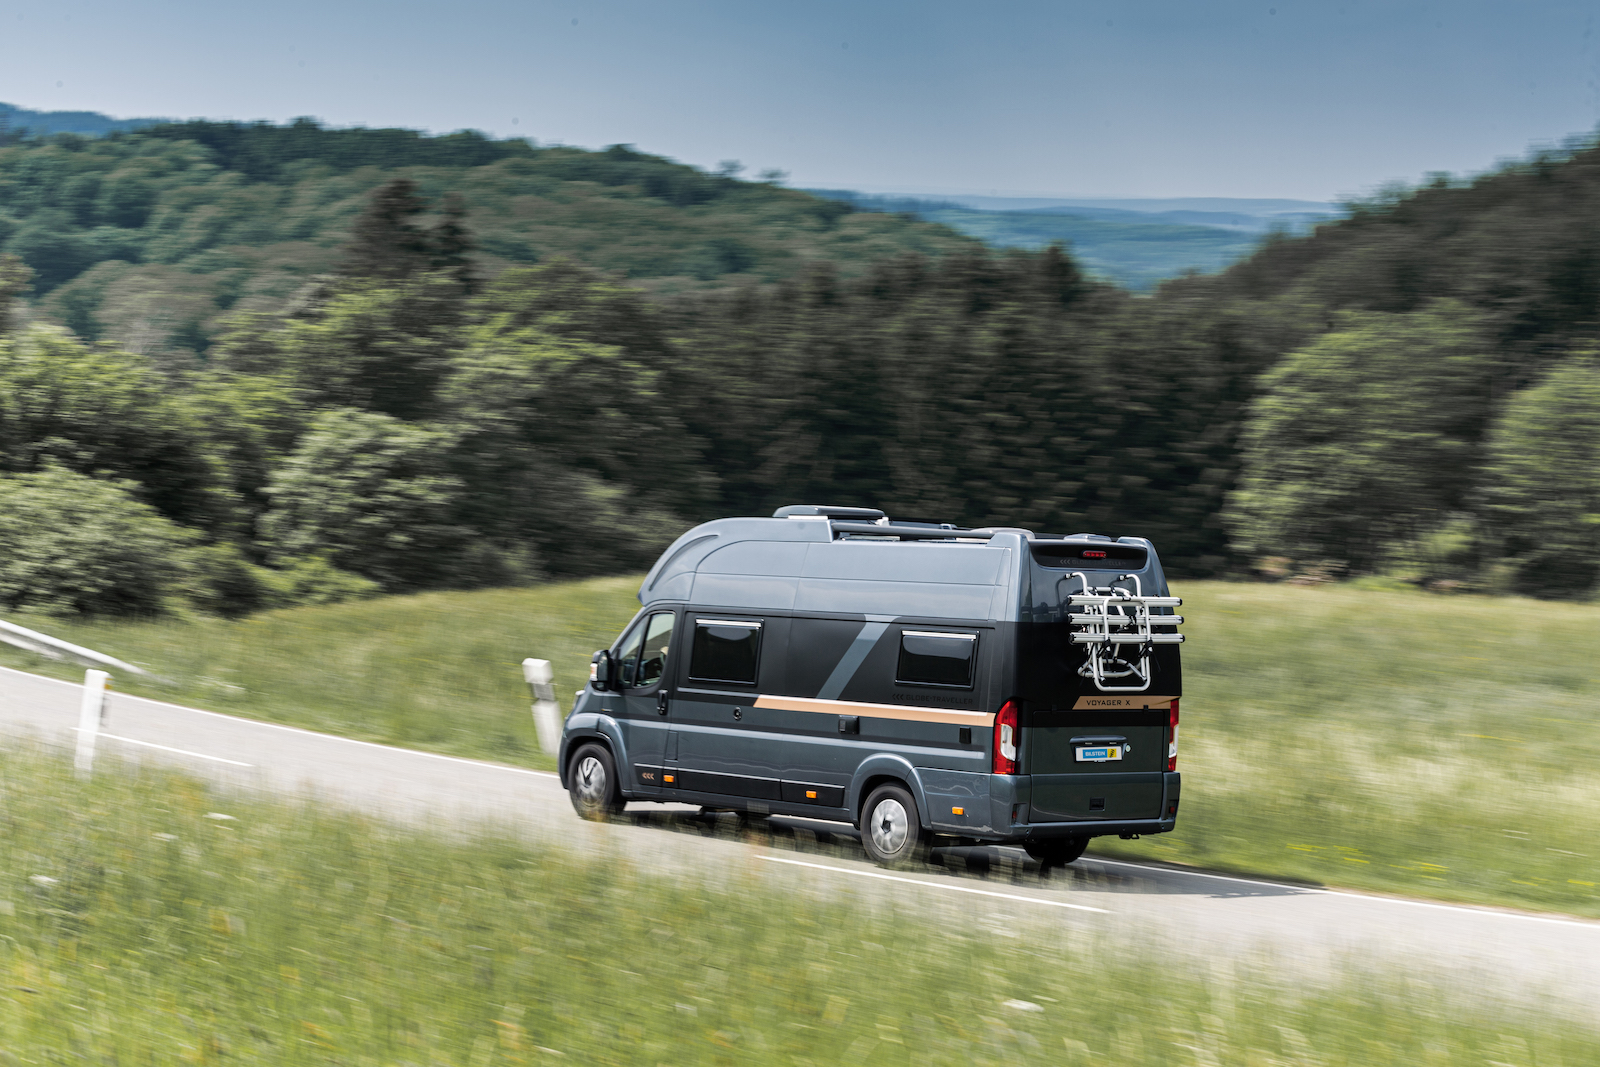 Fiat gives camper vans more grip with the all-new Ducato 4x4